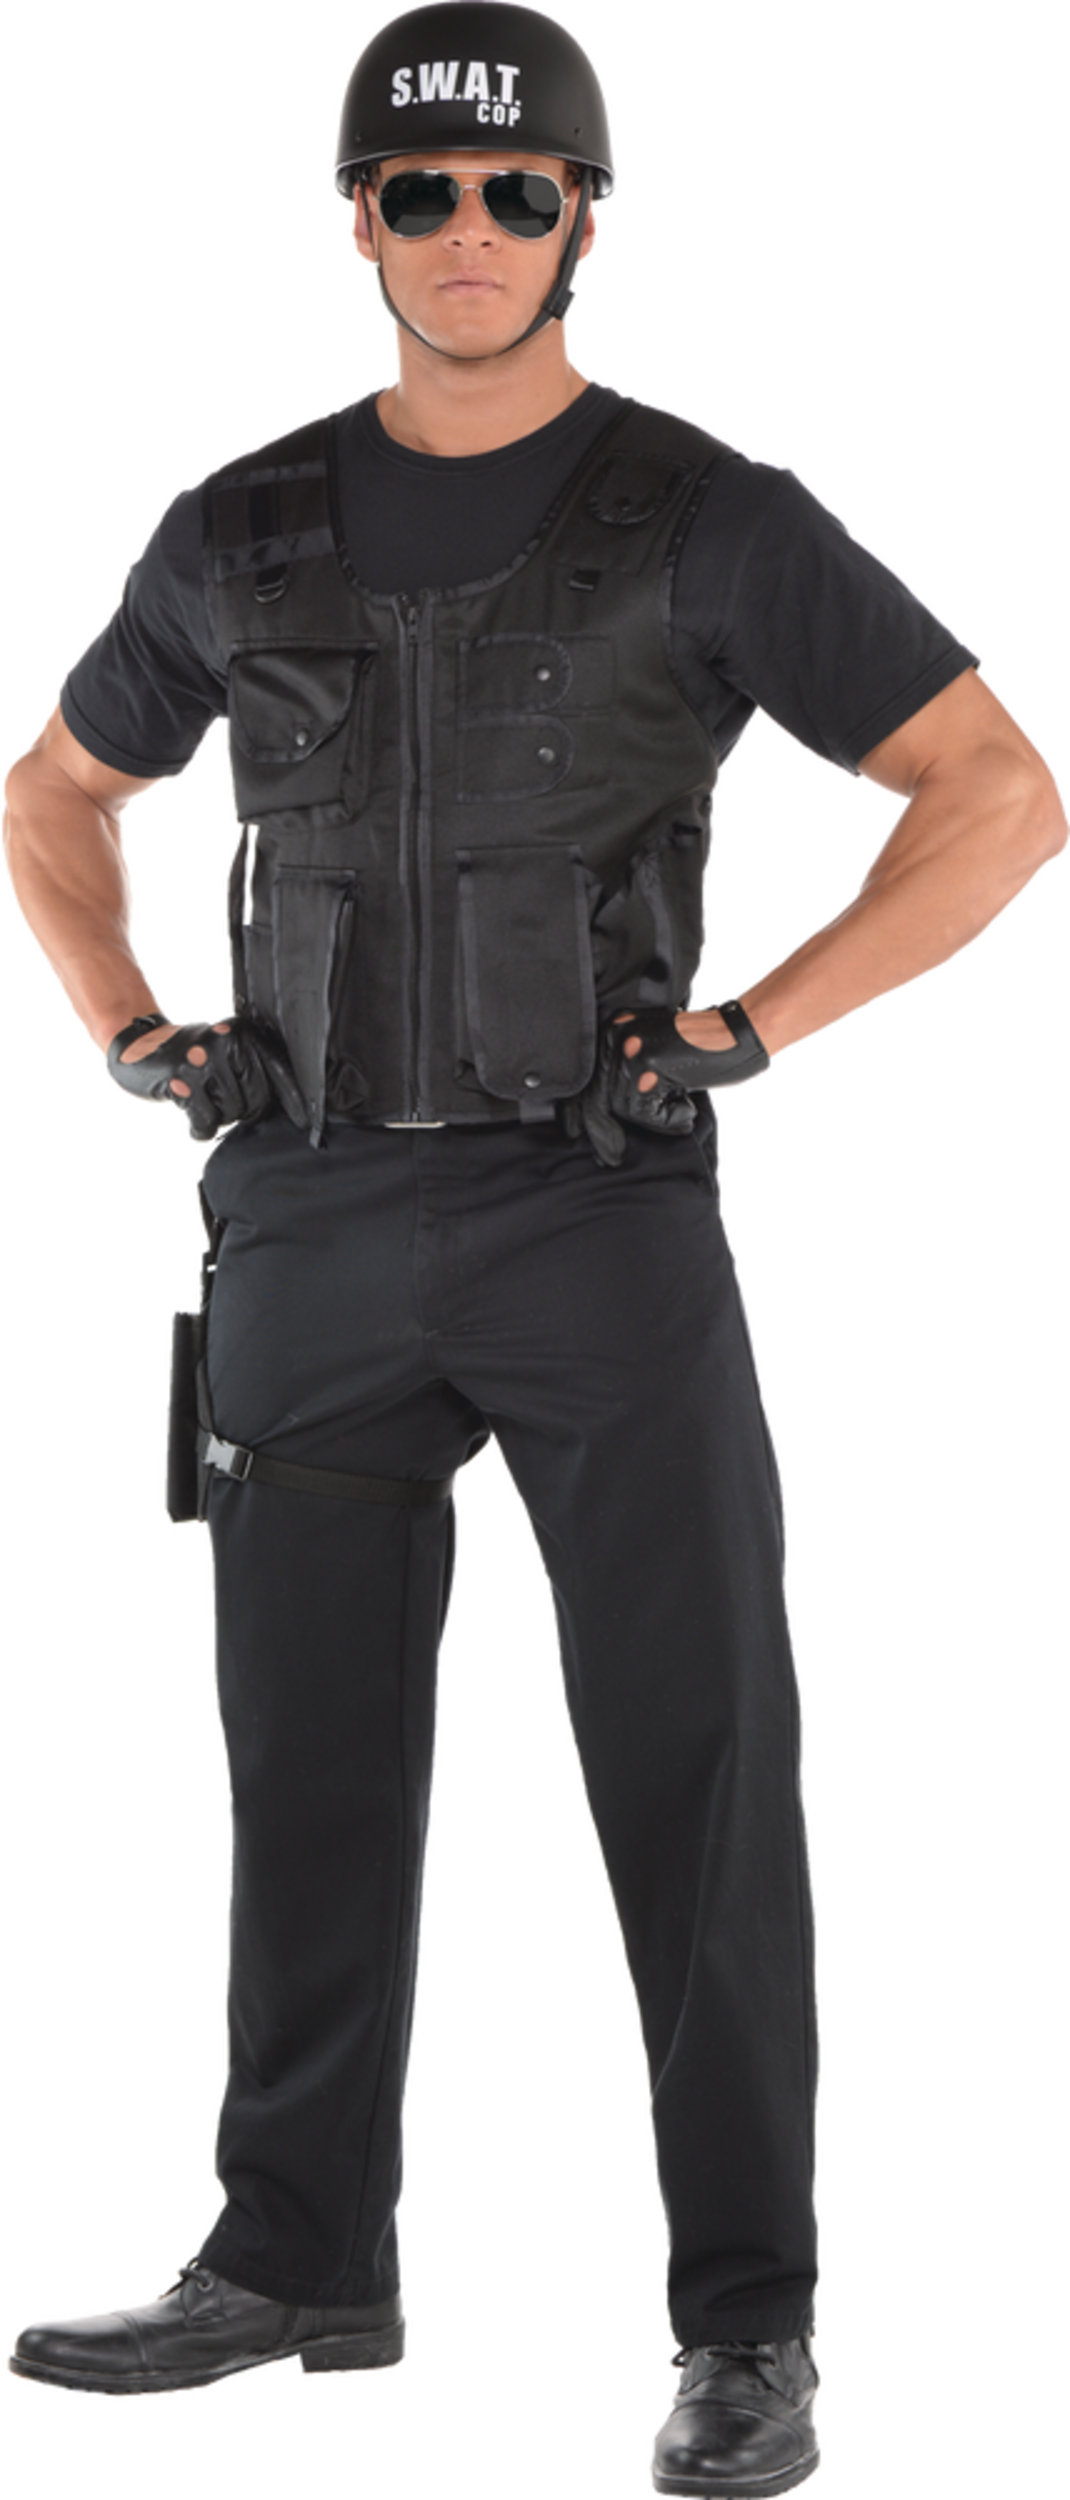 S.W.A.T Vest, Black, One Size, Wearable Costume Accessory for Halloween ...